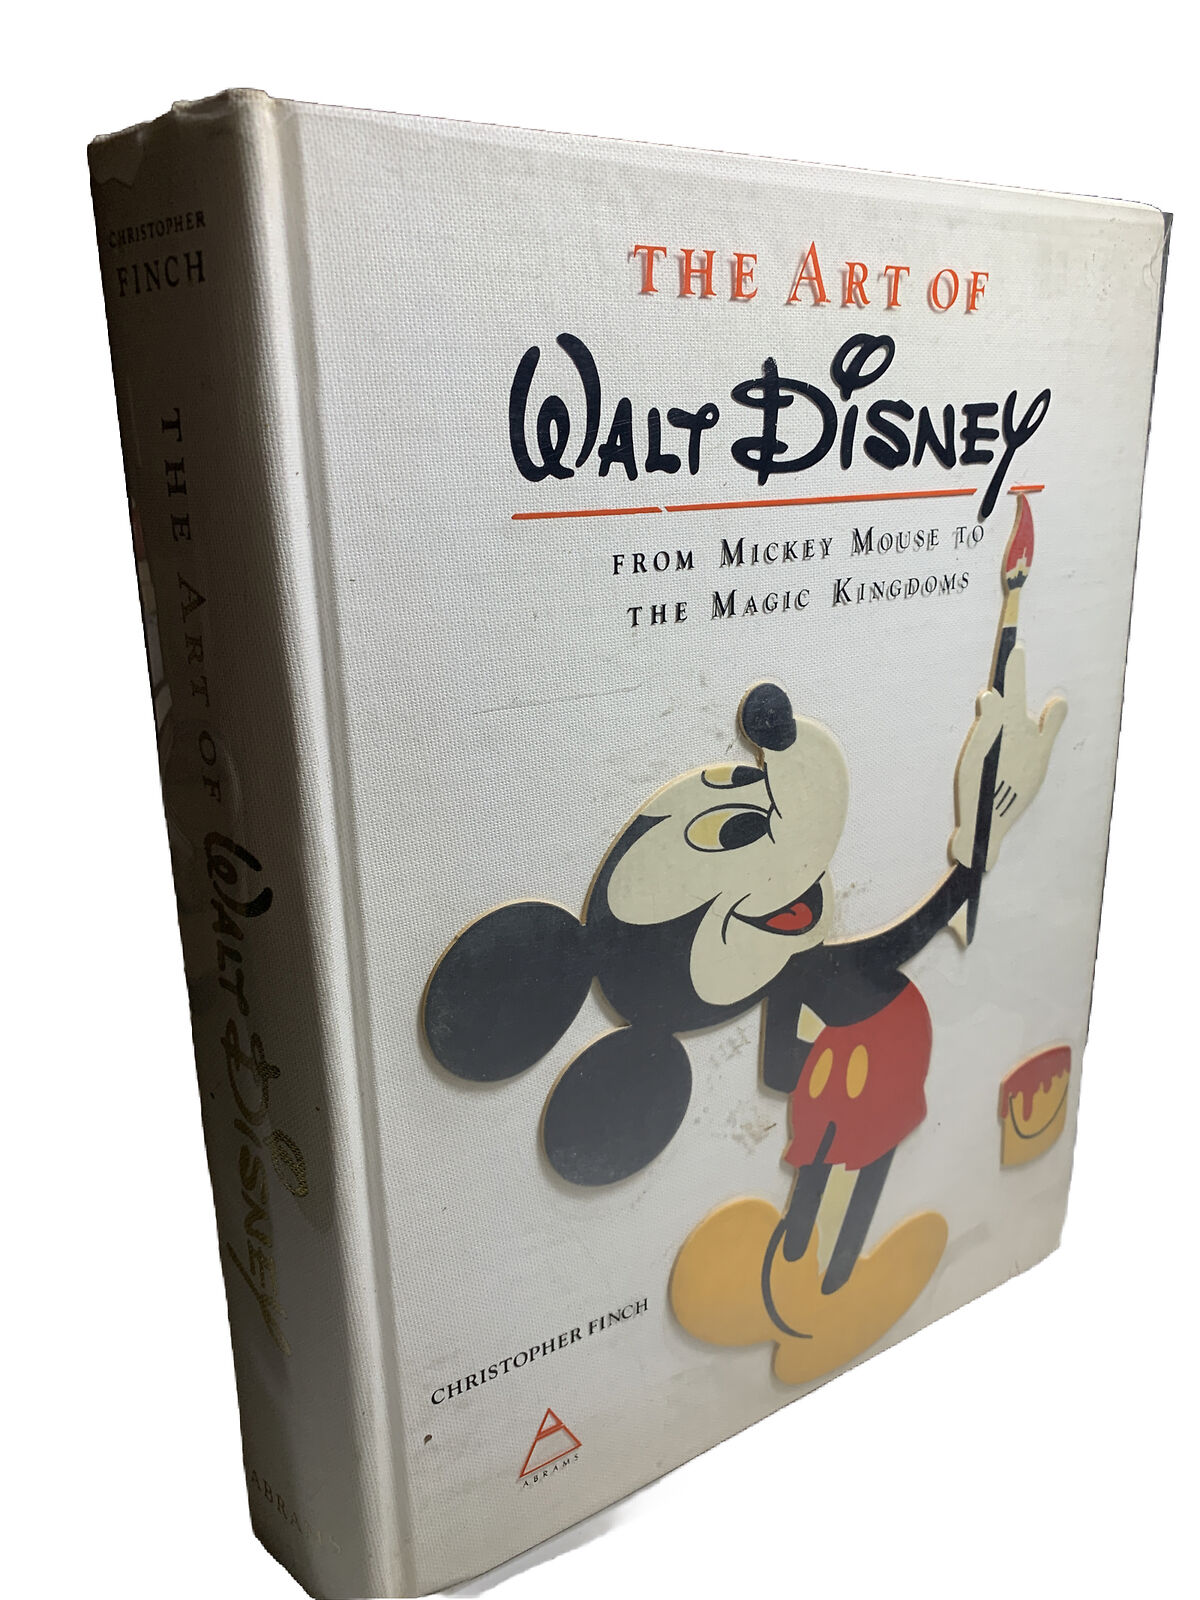 The Art Of Walt Disney By Christopher Finch Abrams 1973 Vintage Book